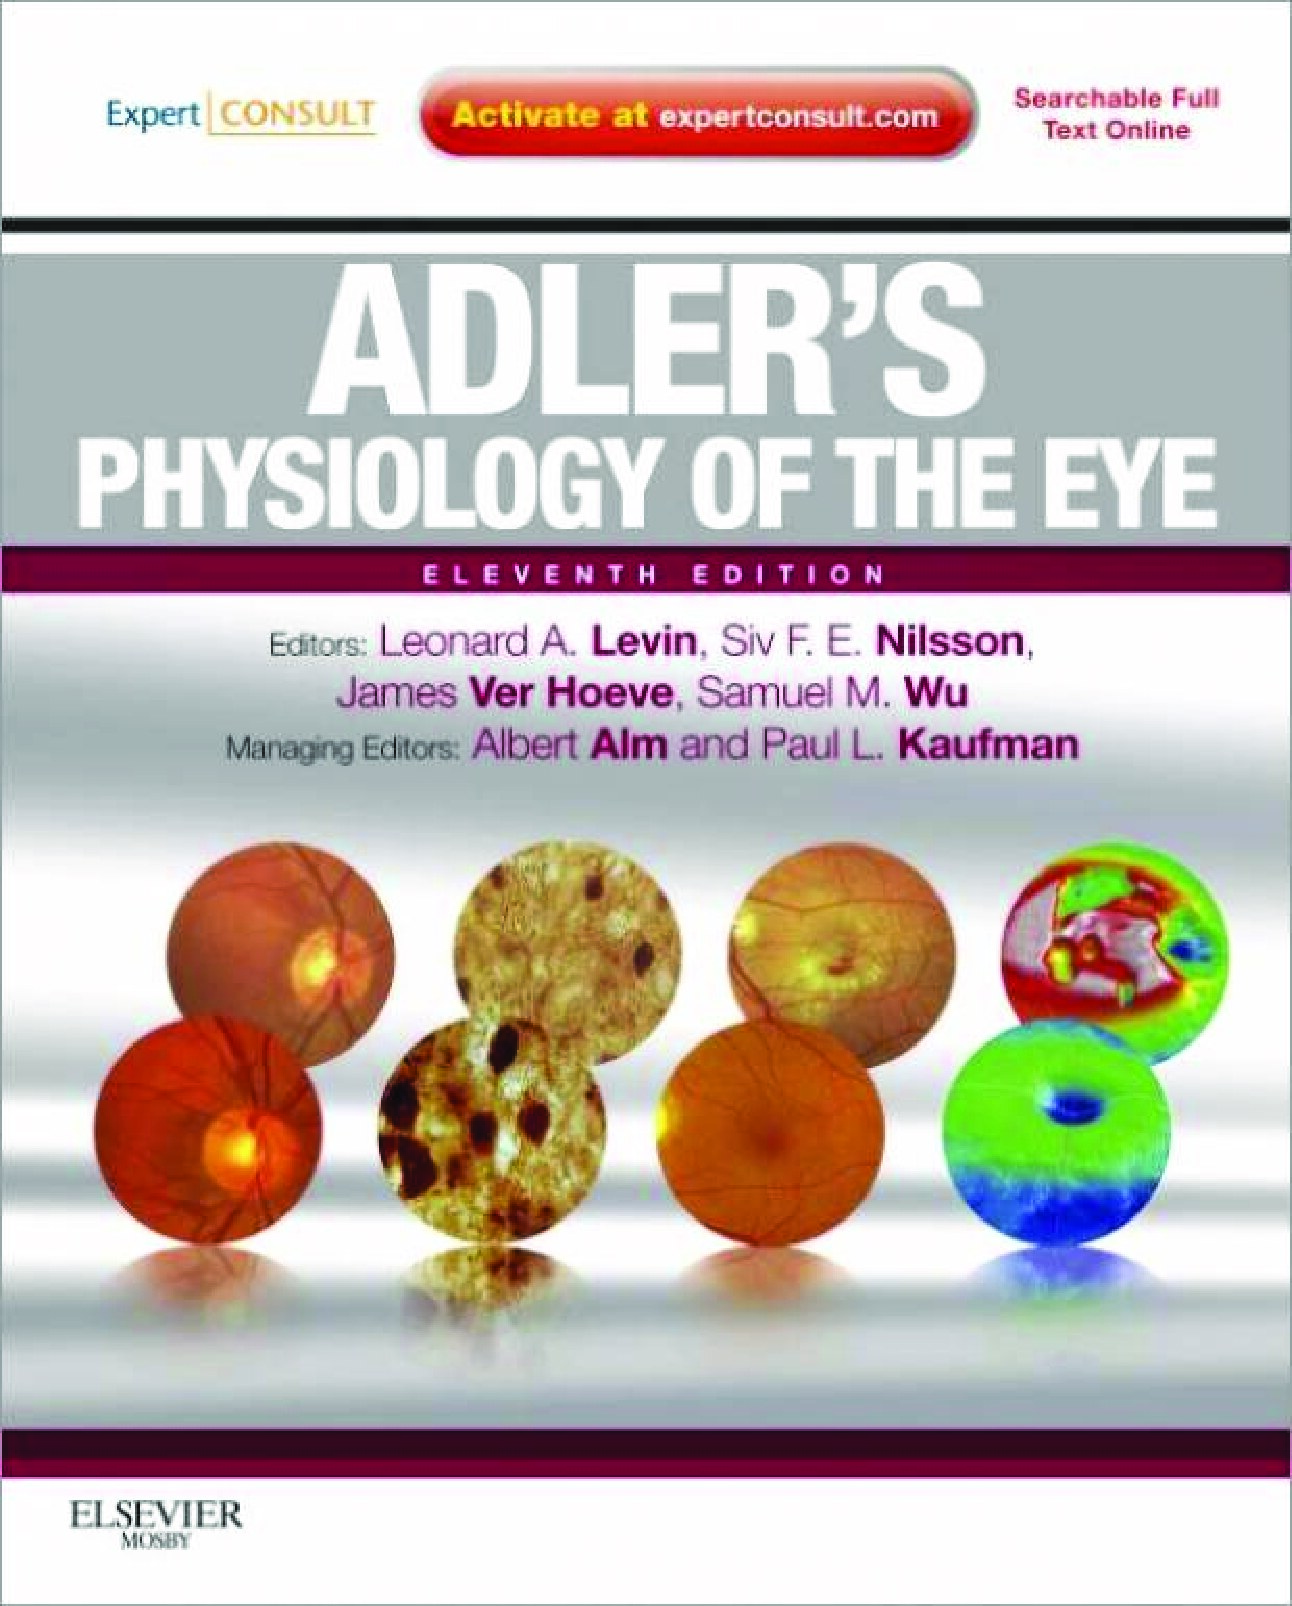 Adler's Physiology of the Eye: Expert Consult, 11Th Edition